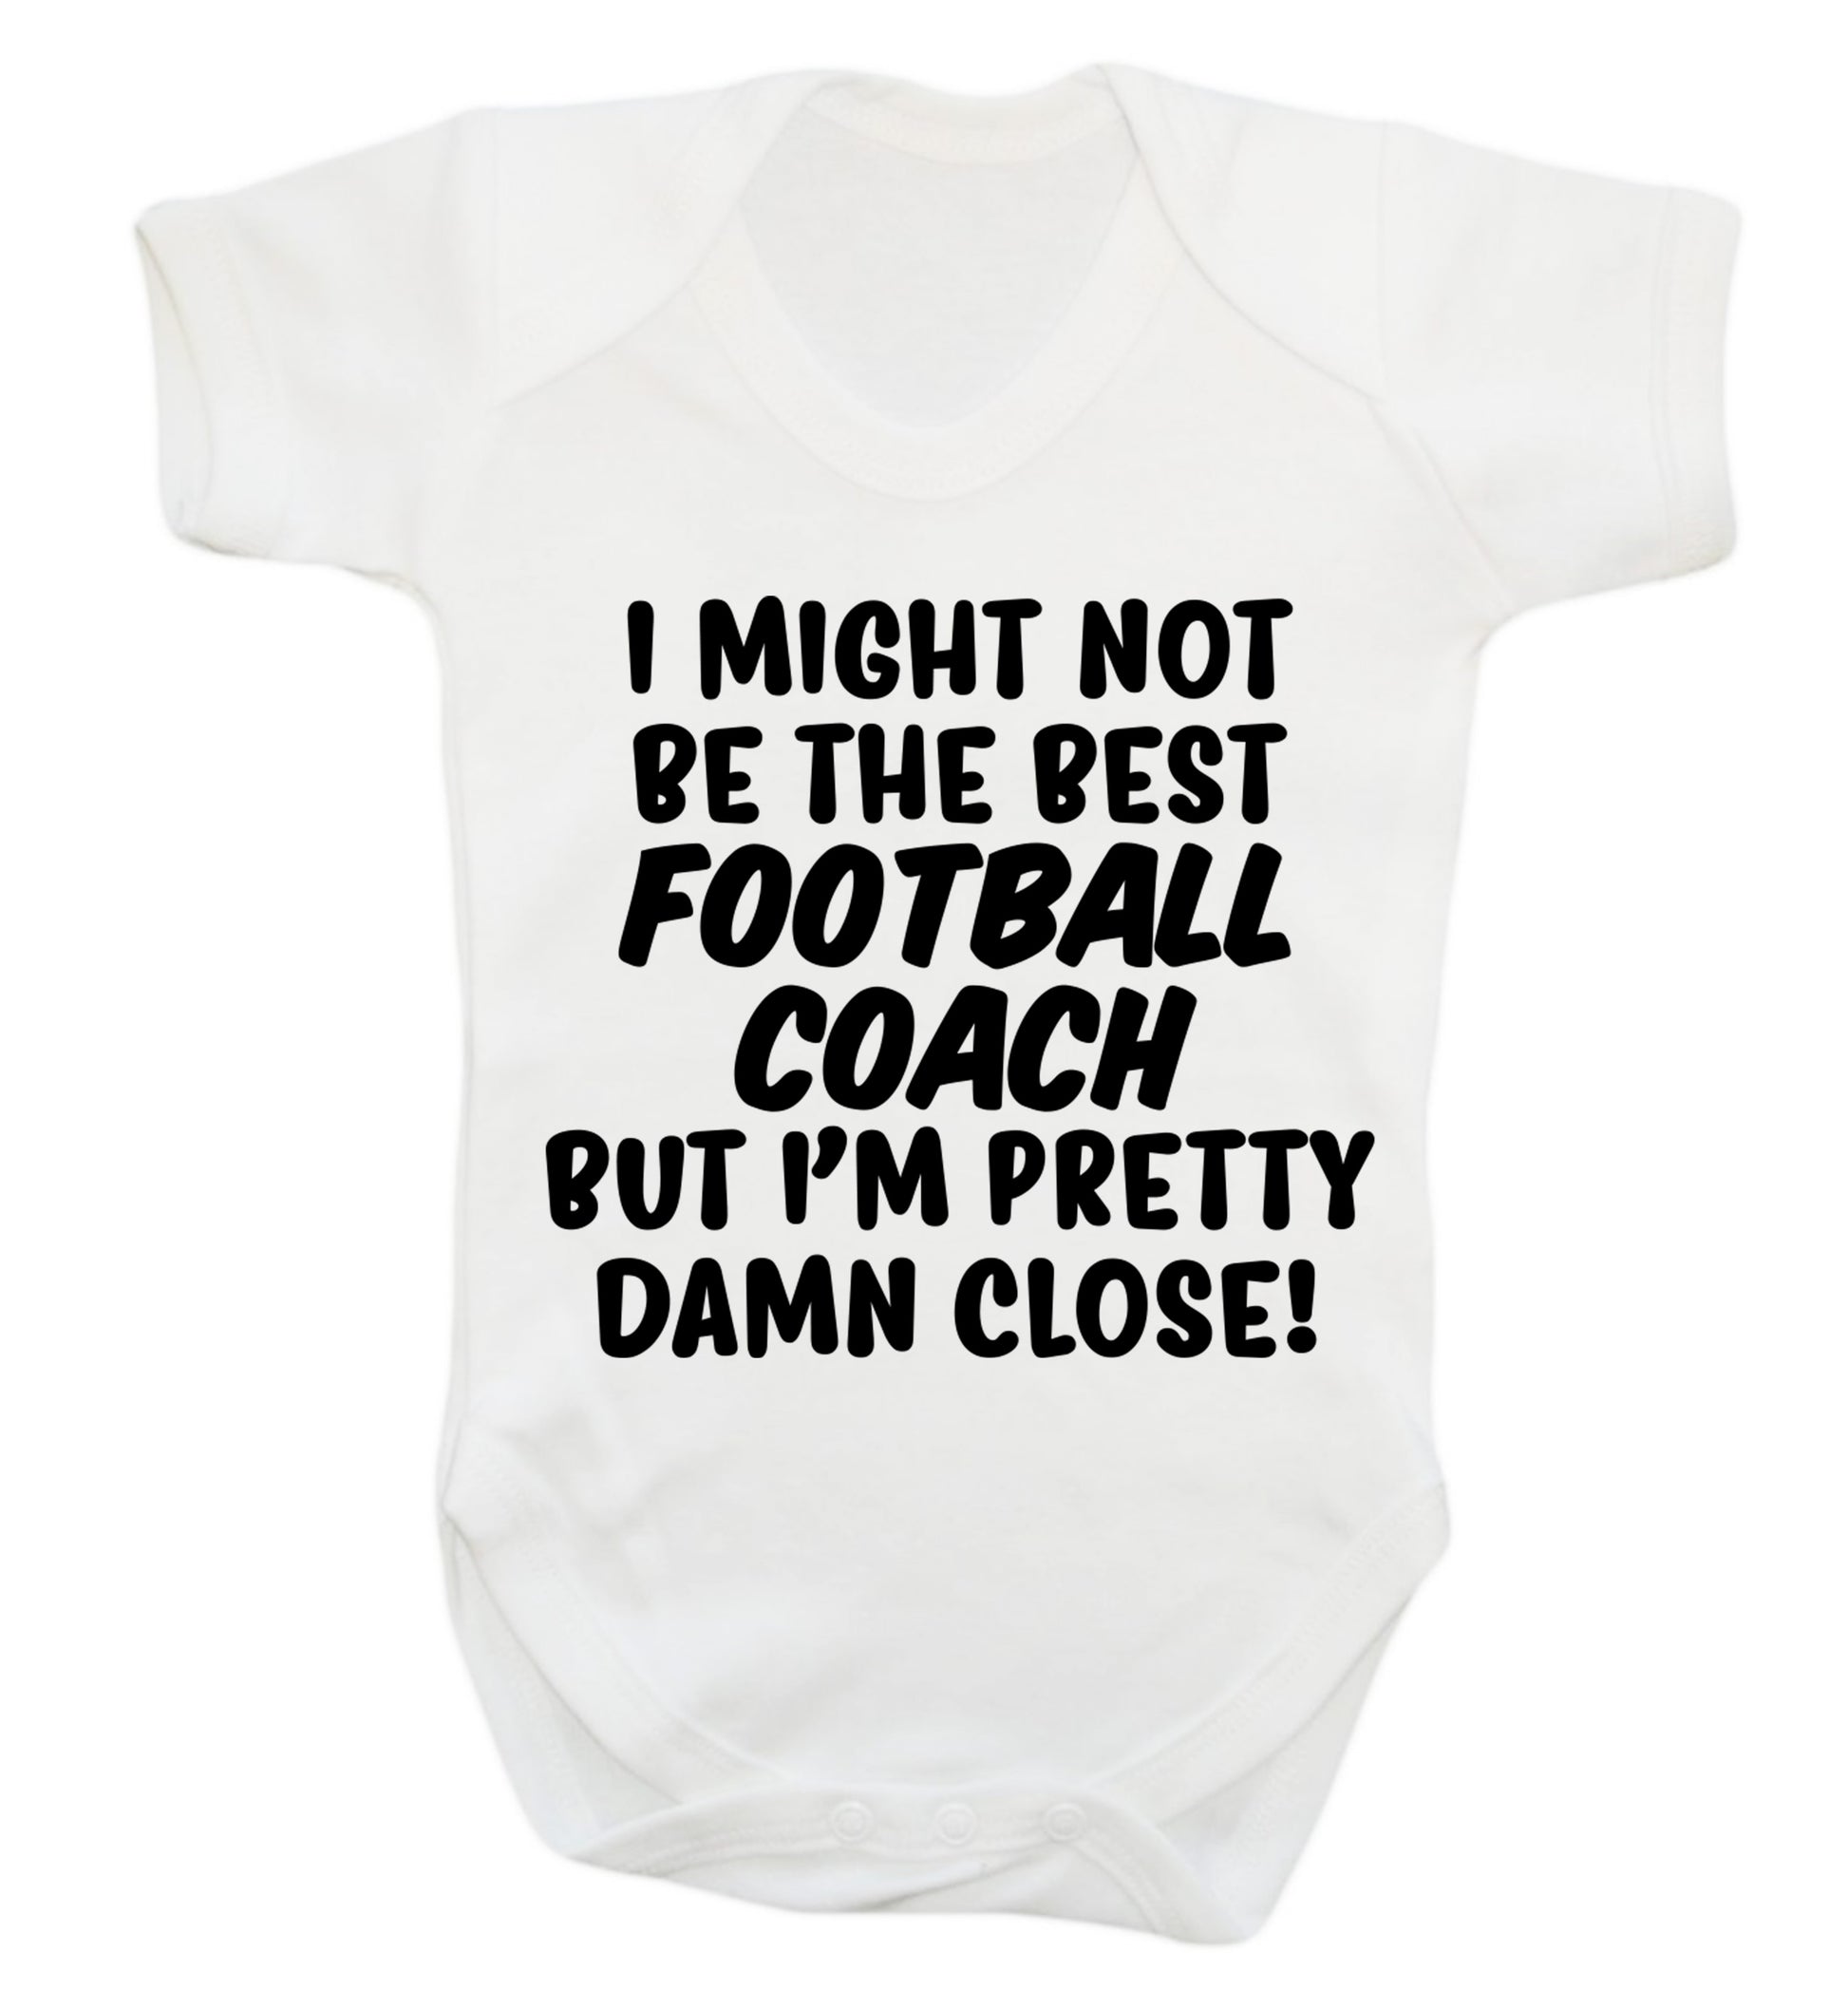 I might not be the best football coach but I'm pretty close! Baby Vest white 18-24 months